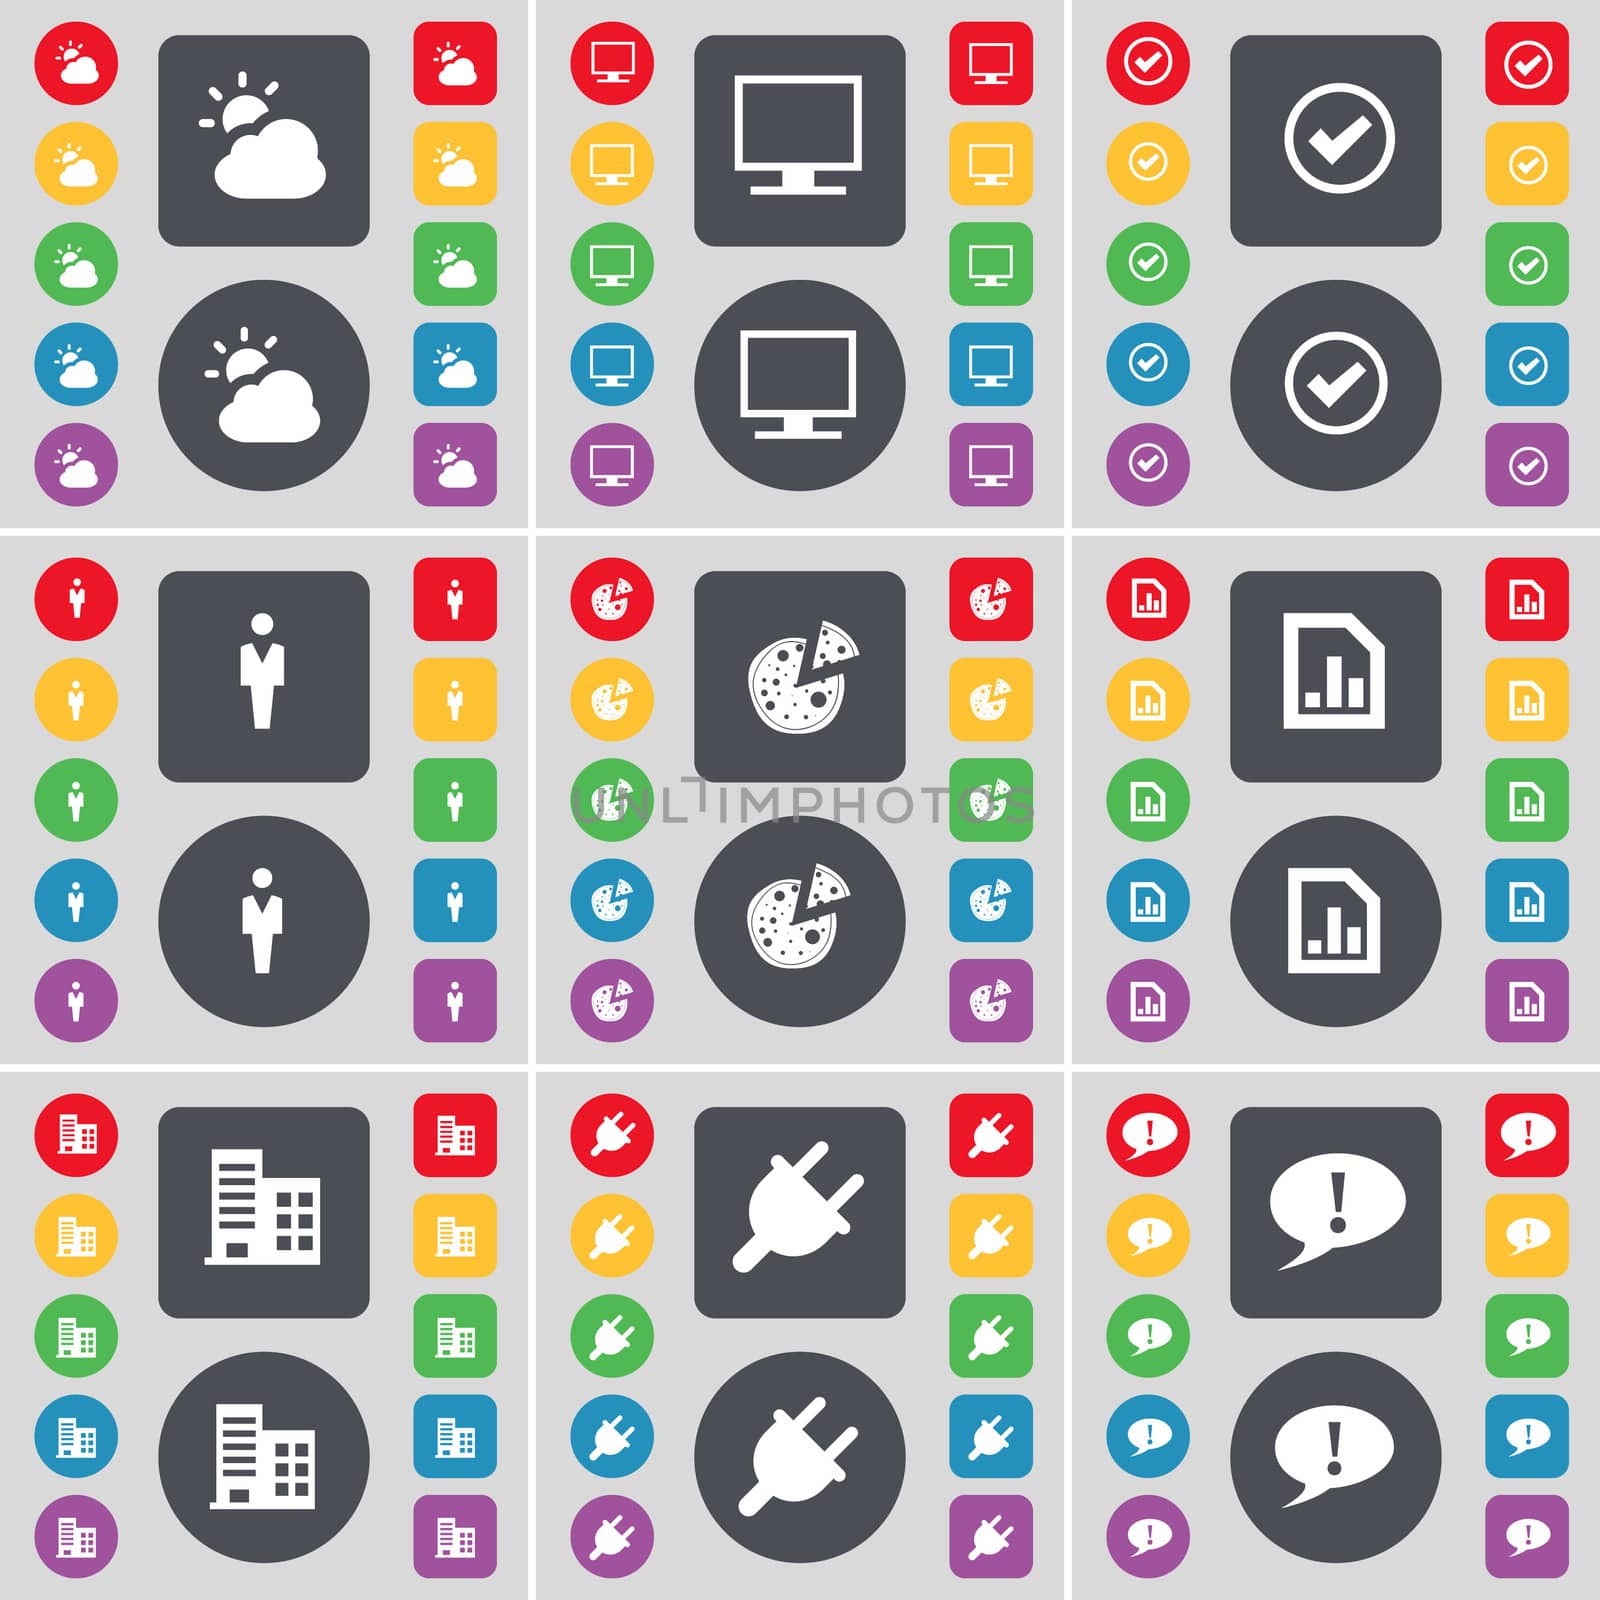 Cloud, Monitor, Tick, Silhouette, Pizza, Graph file, Building, Socket, Chat bubble icon symbol. A large set of flat, colored buttons for your design.  by serhii_lohvyniuk